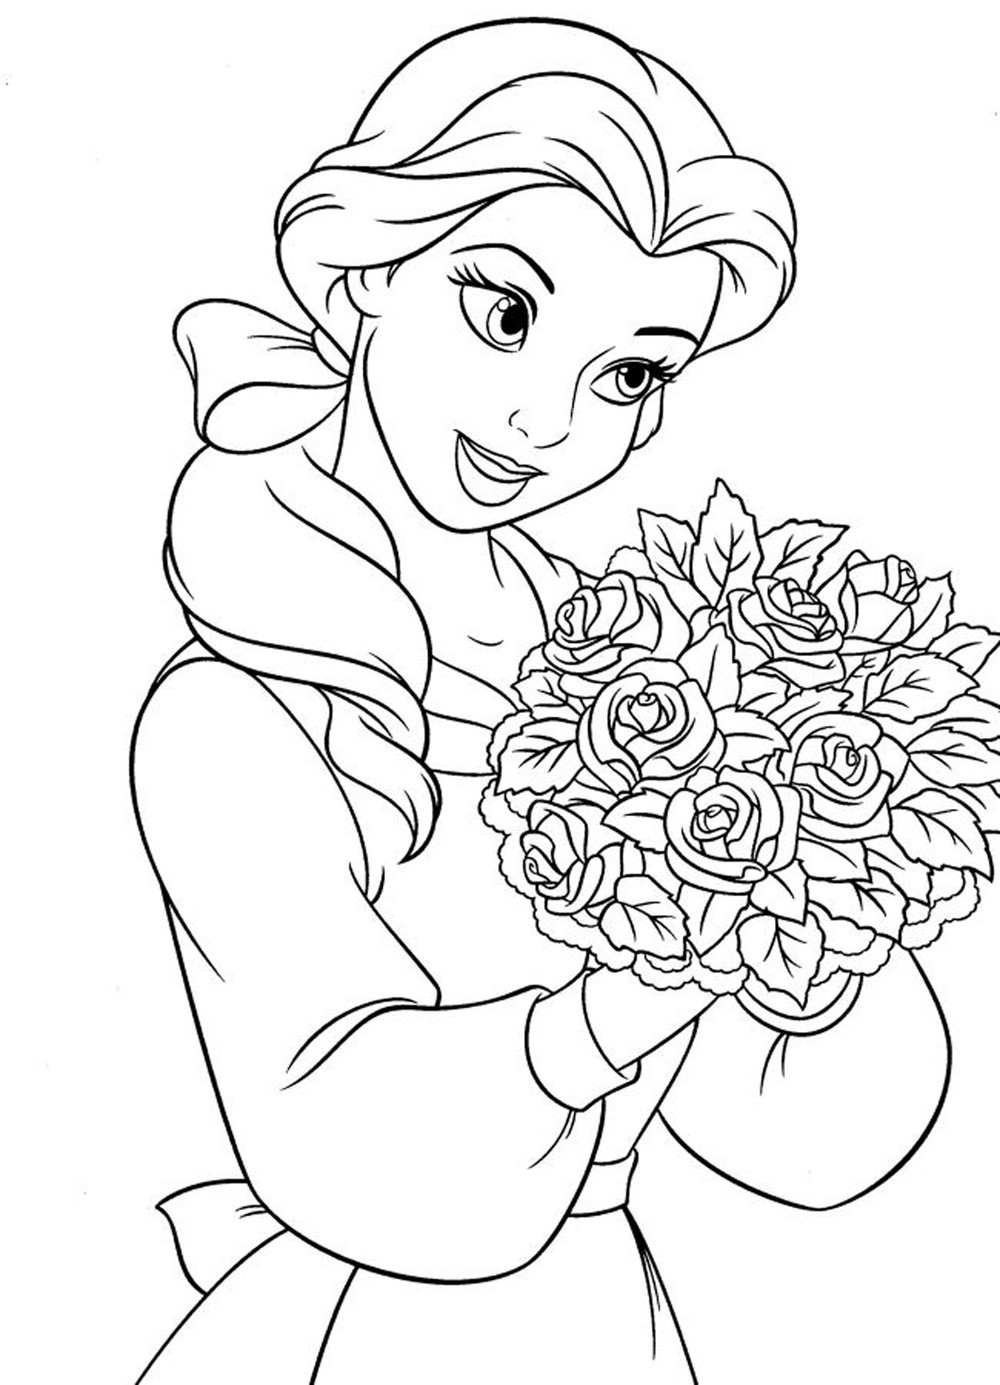 Coloring Sheets For Girls
 coloring pages for girls